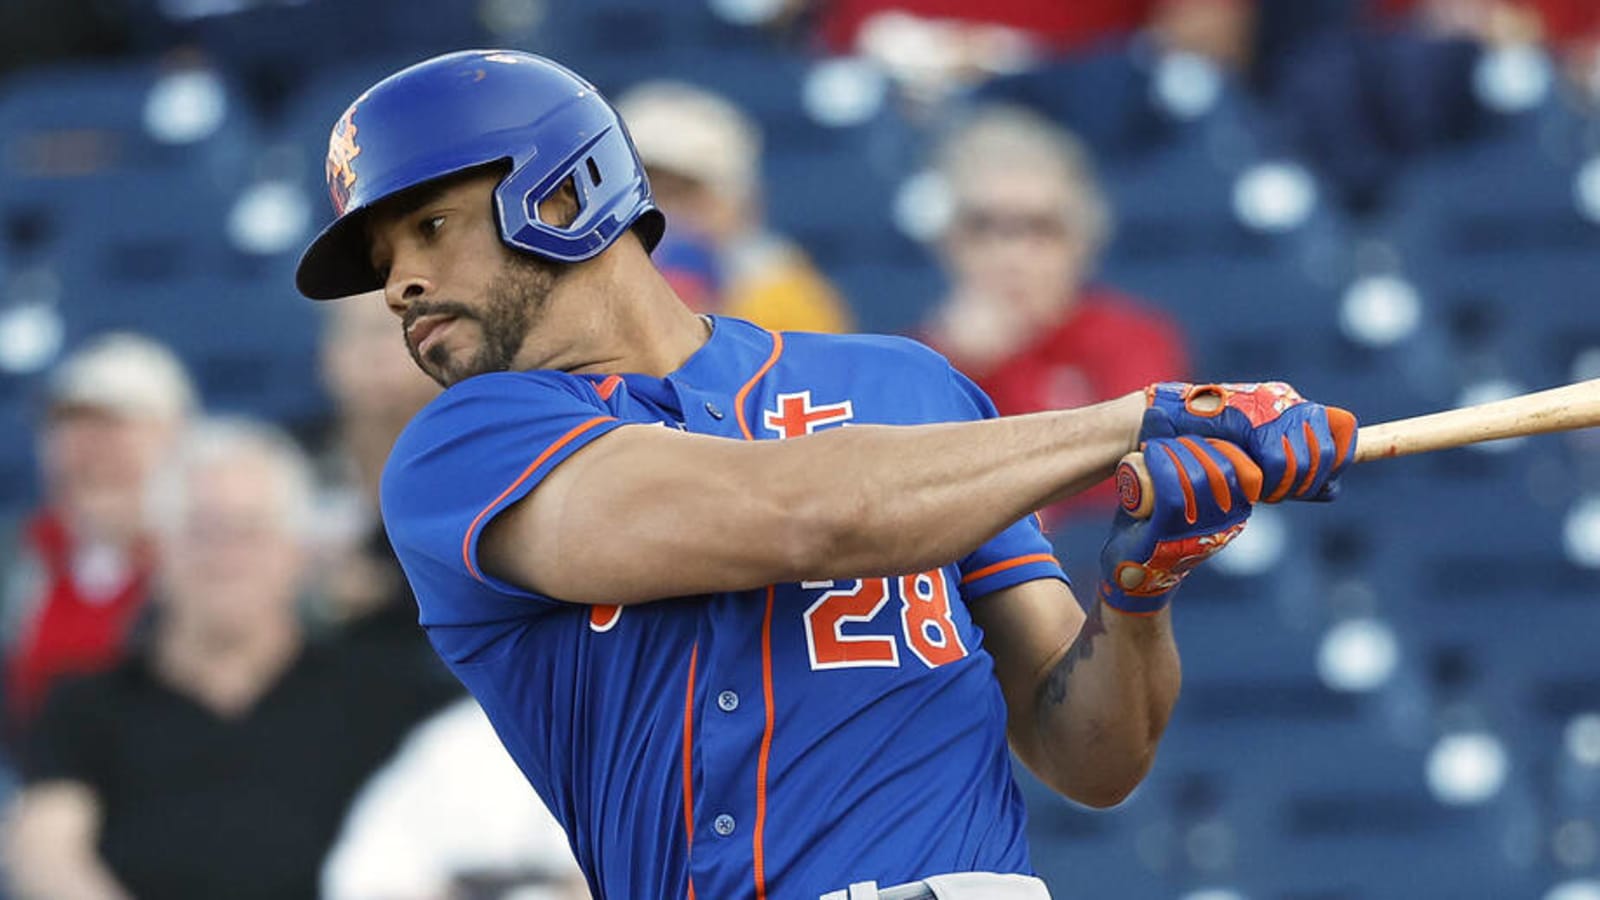 How eye doctor helped Mets' Tommy Pham improve at the plate